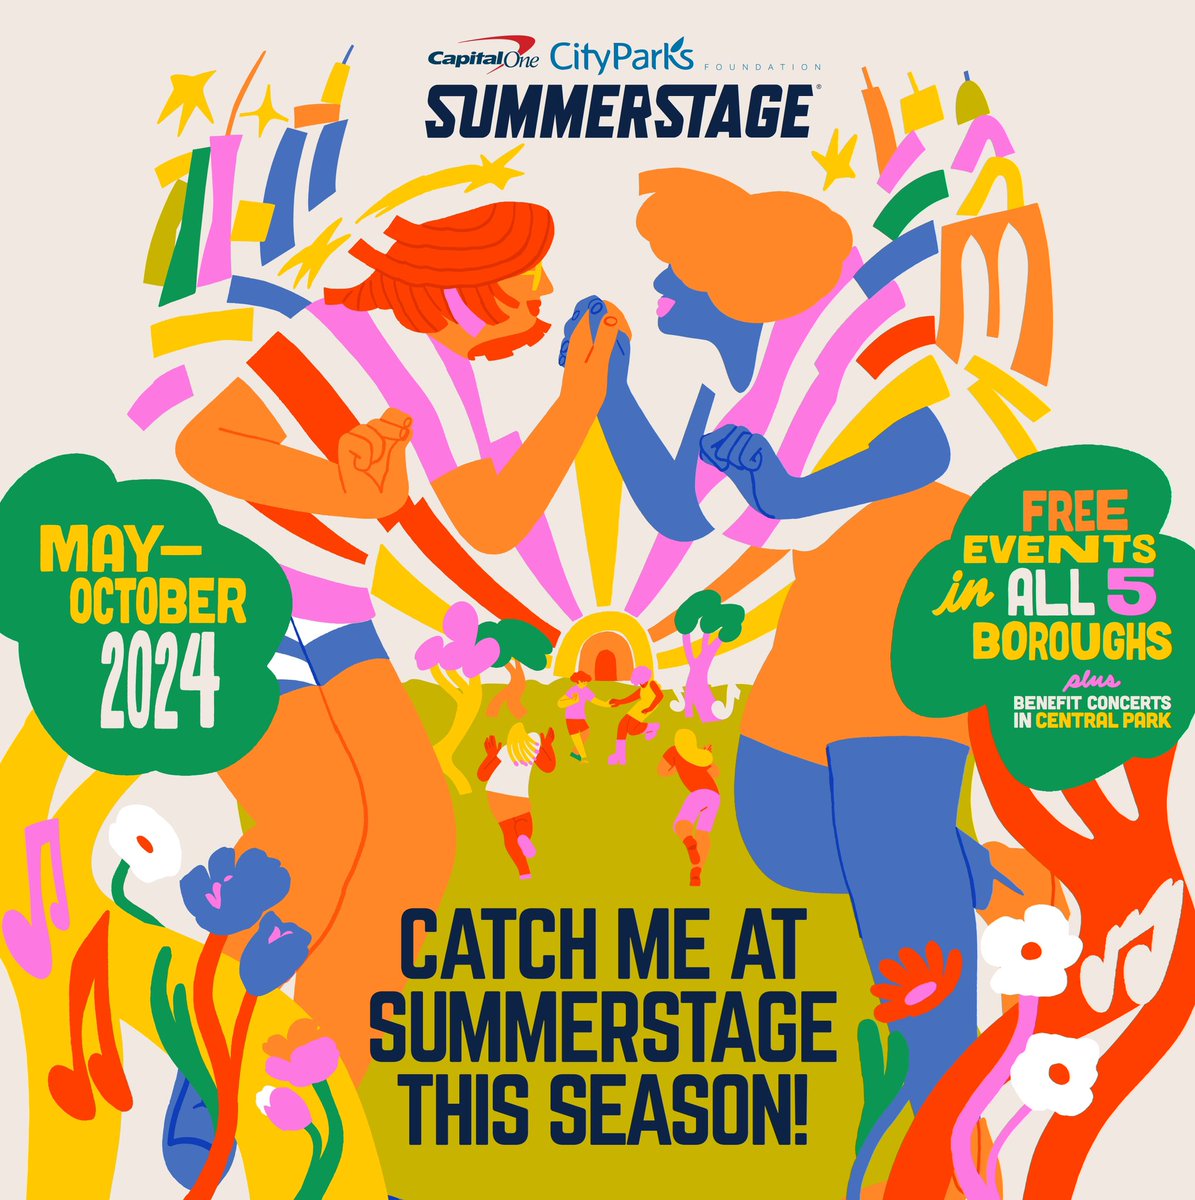 Hey New York! @SummerStage just announced their 2024 season and I’m playing in Tompkins Square Park on 8/25 for FREE! #summerstage #shareyoursummerstage